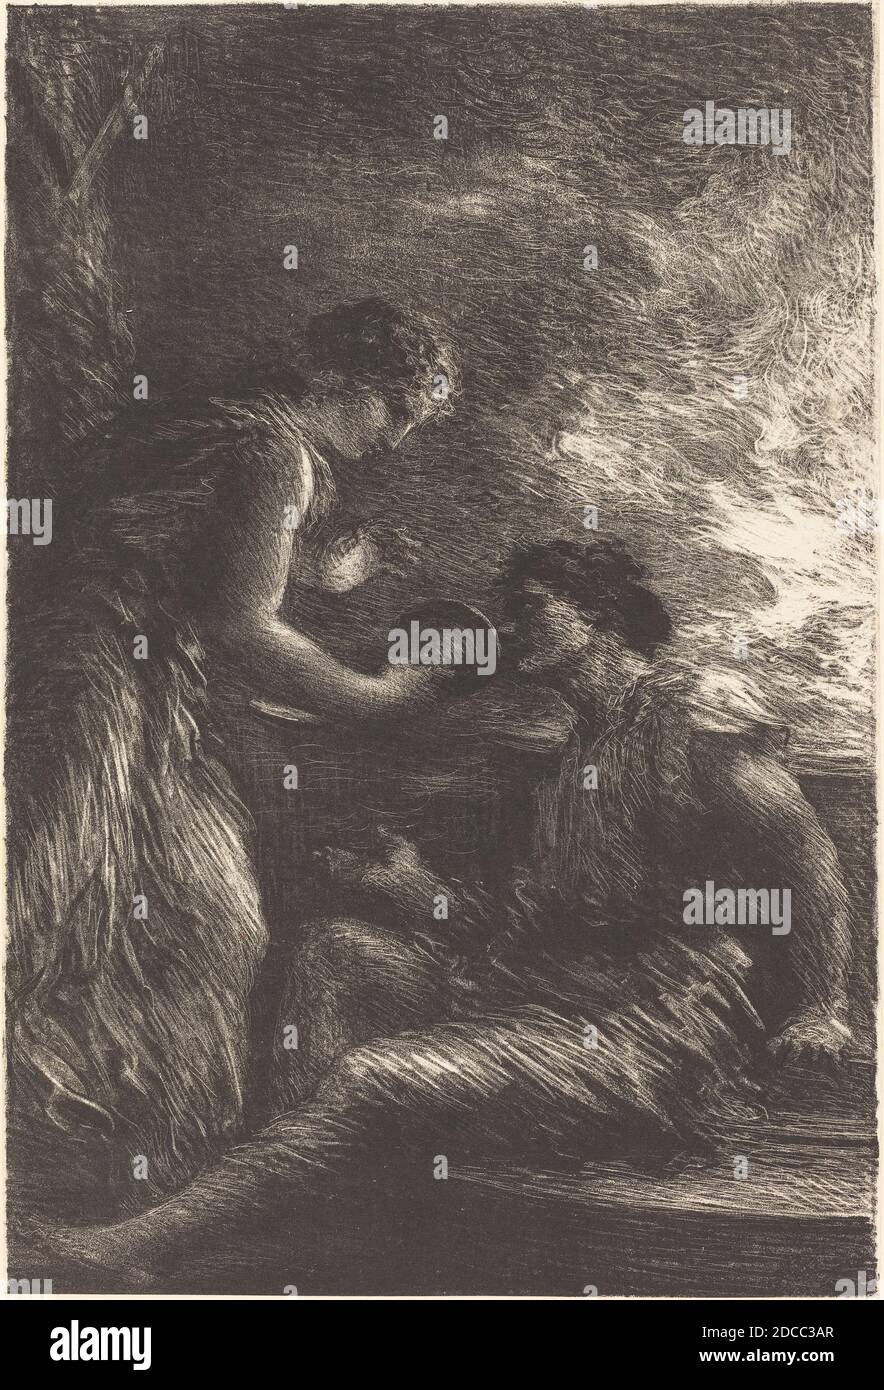 Henri Fantin-Latour, (artist), French, 1836 - 1904, Sieglinde and Siegmund from Act I of 'The Valkyrie', Wagner's 'Die Walkure', (series), lithograph Stock Photo